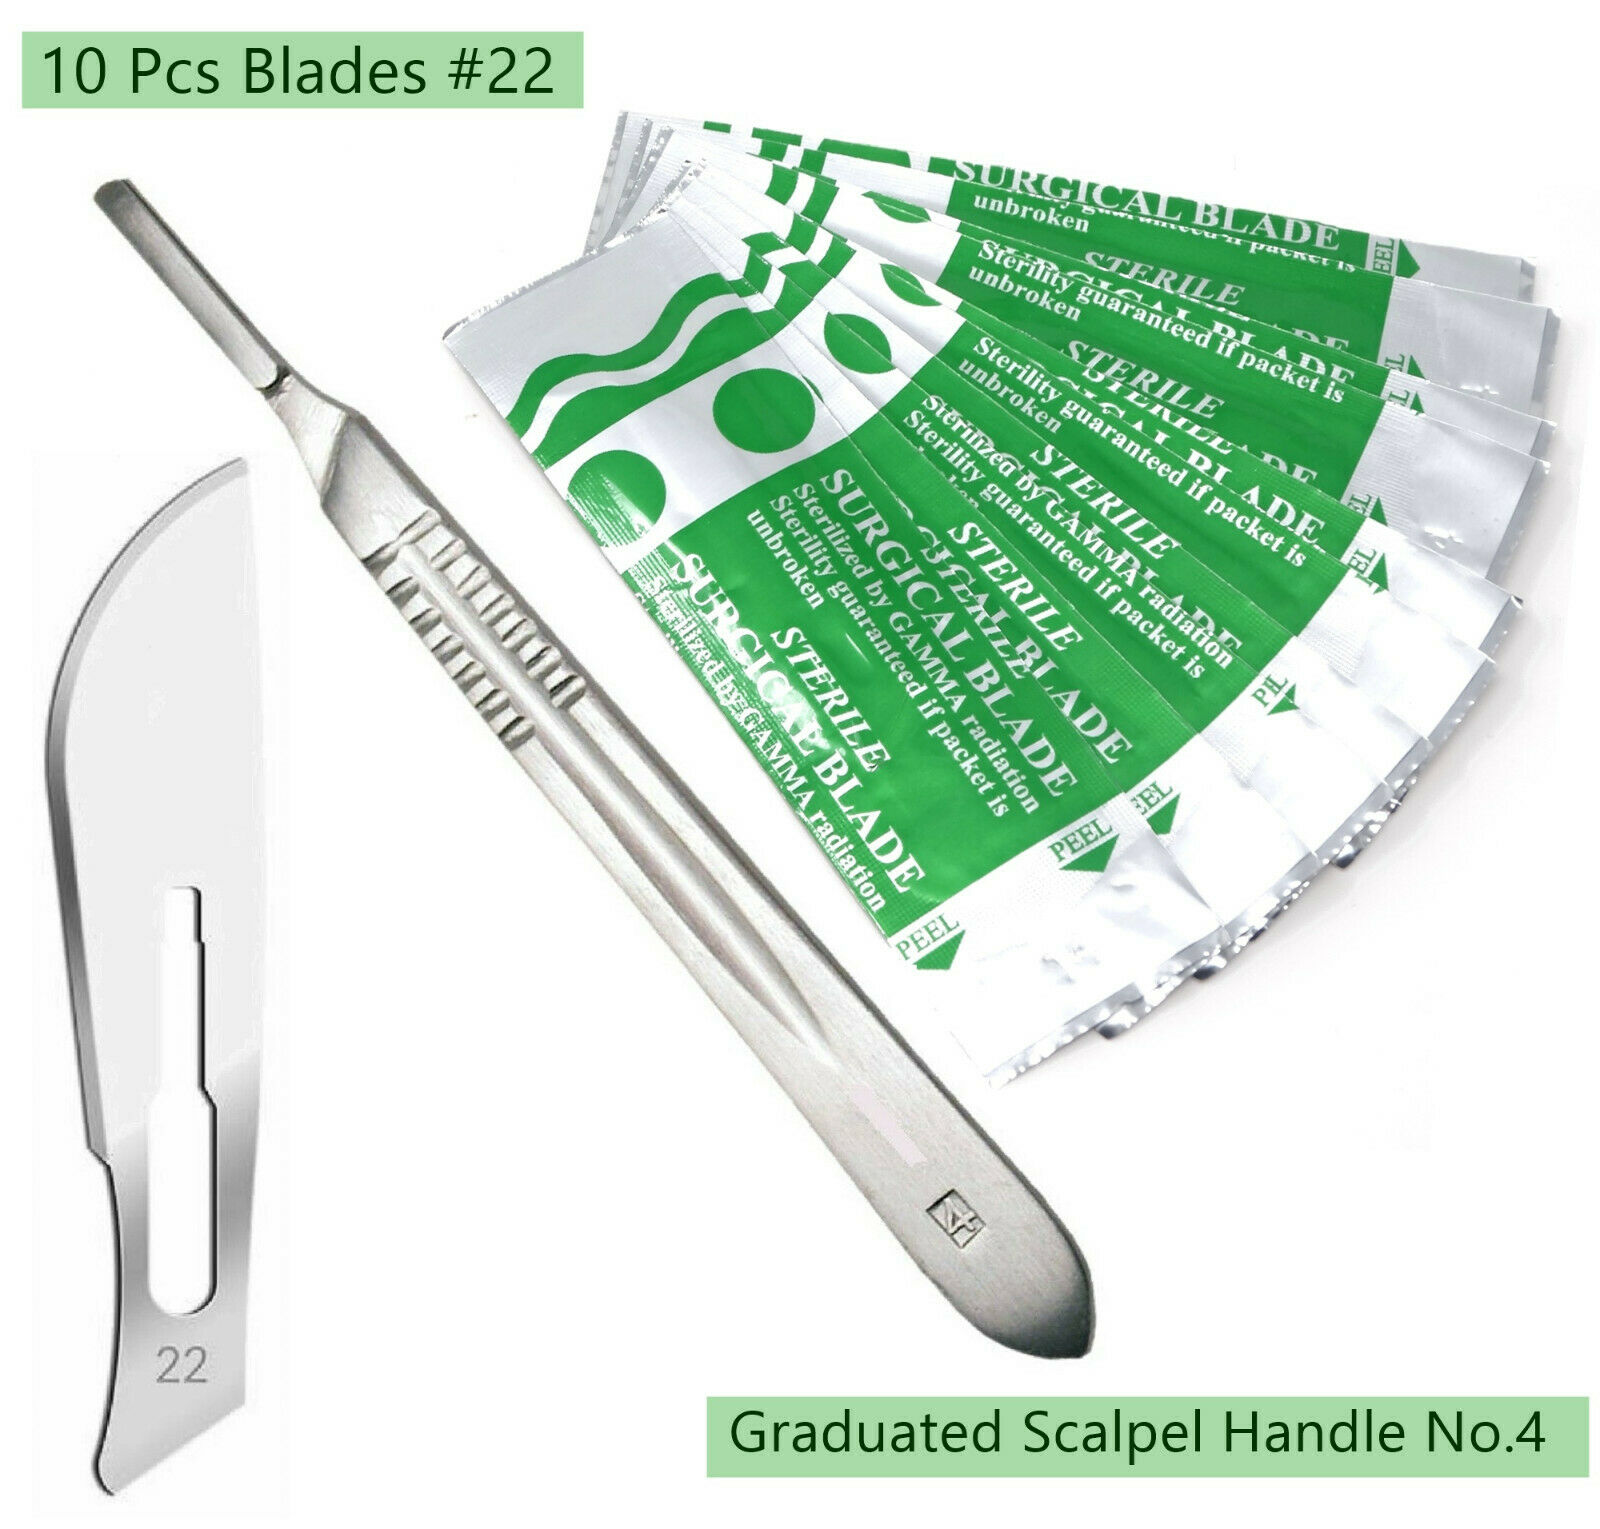 Brand New Scalpel Knife Handle Holder #4 +10 Surgical Sterile Blades #22